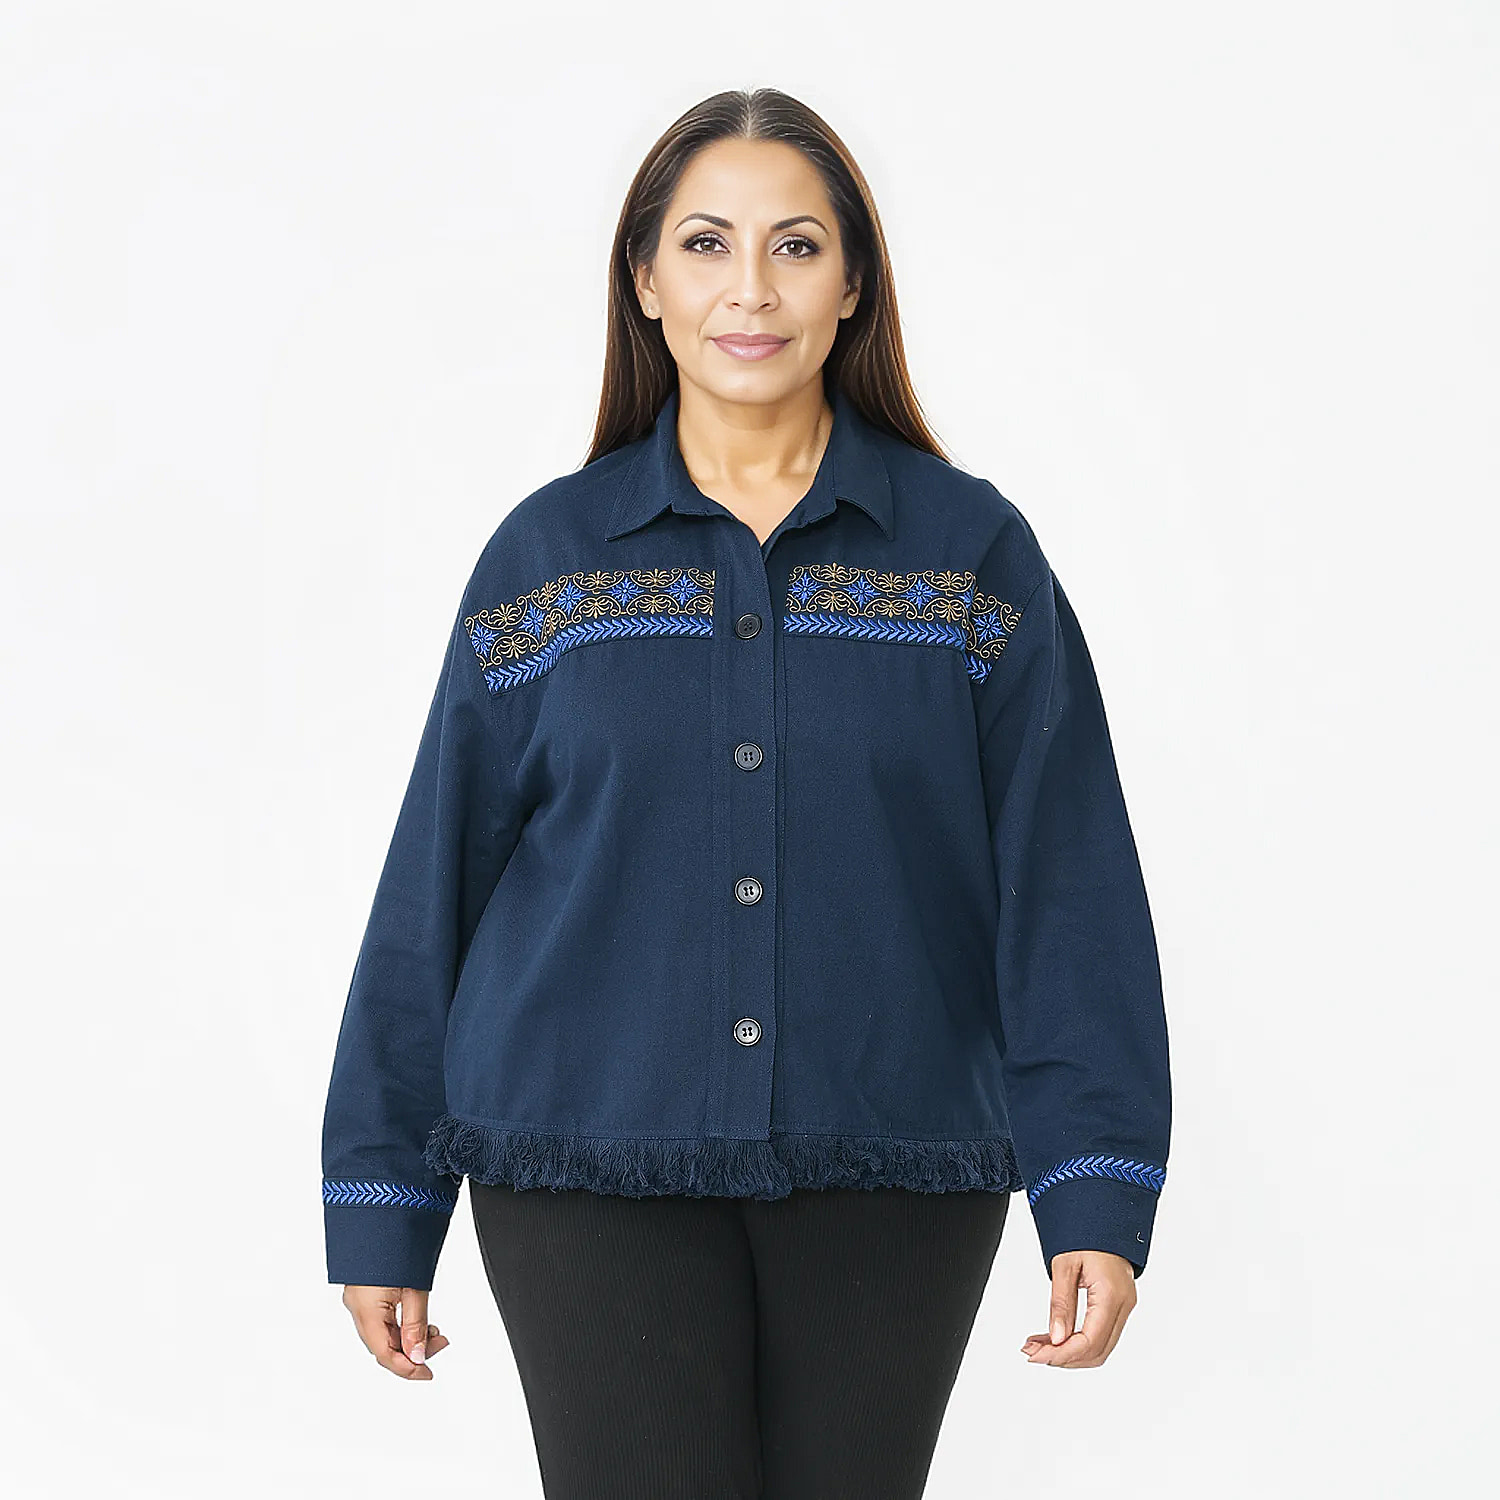 Tamsy 100% Cotton Embroidered Jacket (Size S,8-10) - Navy